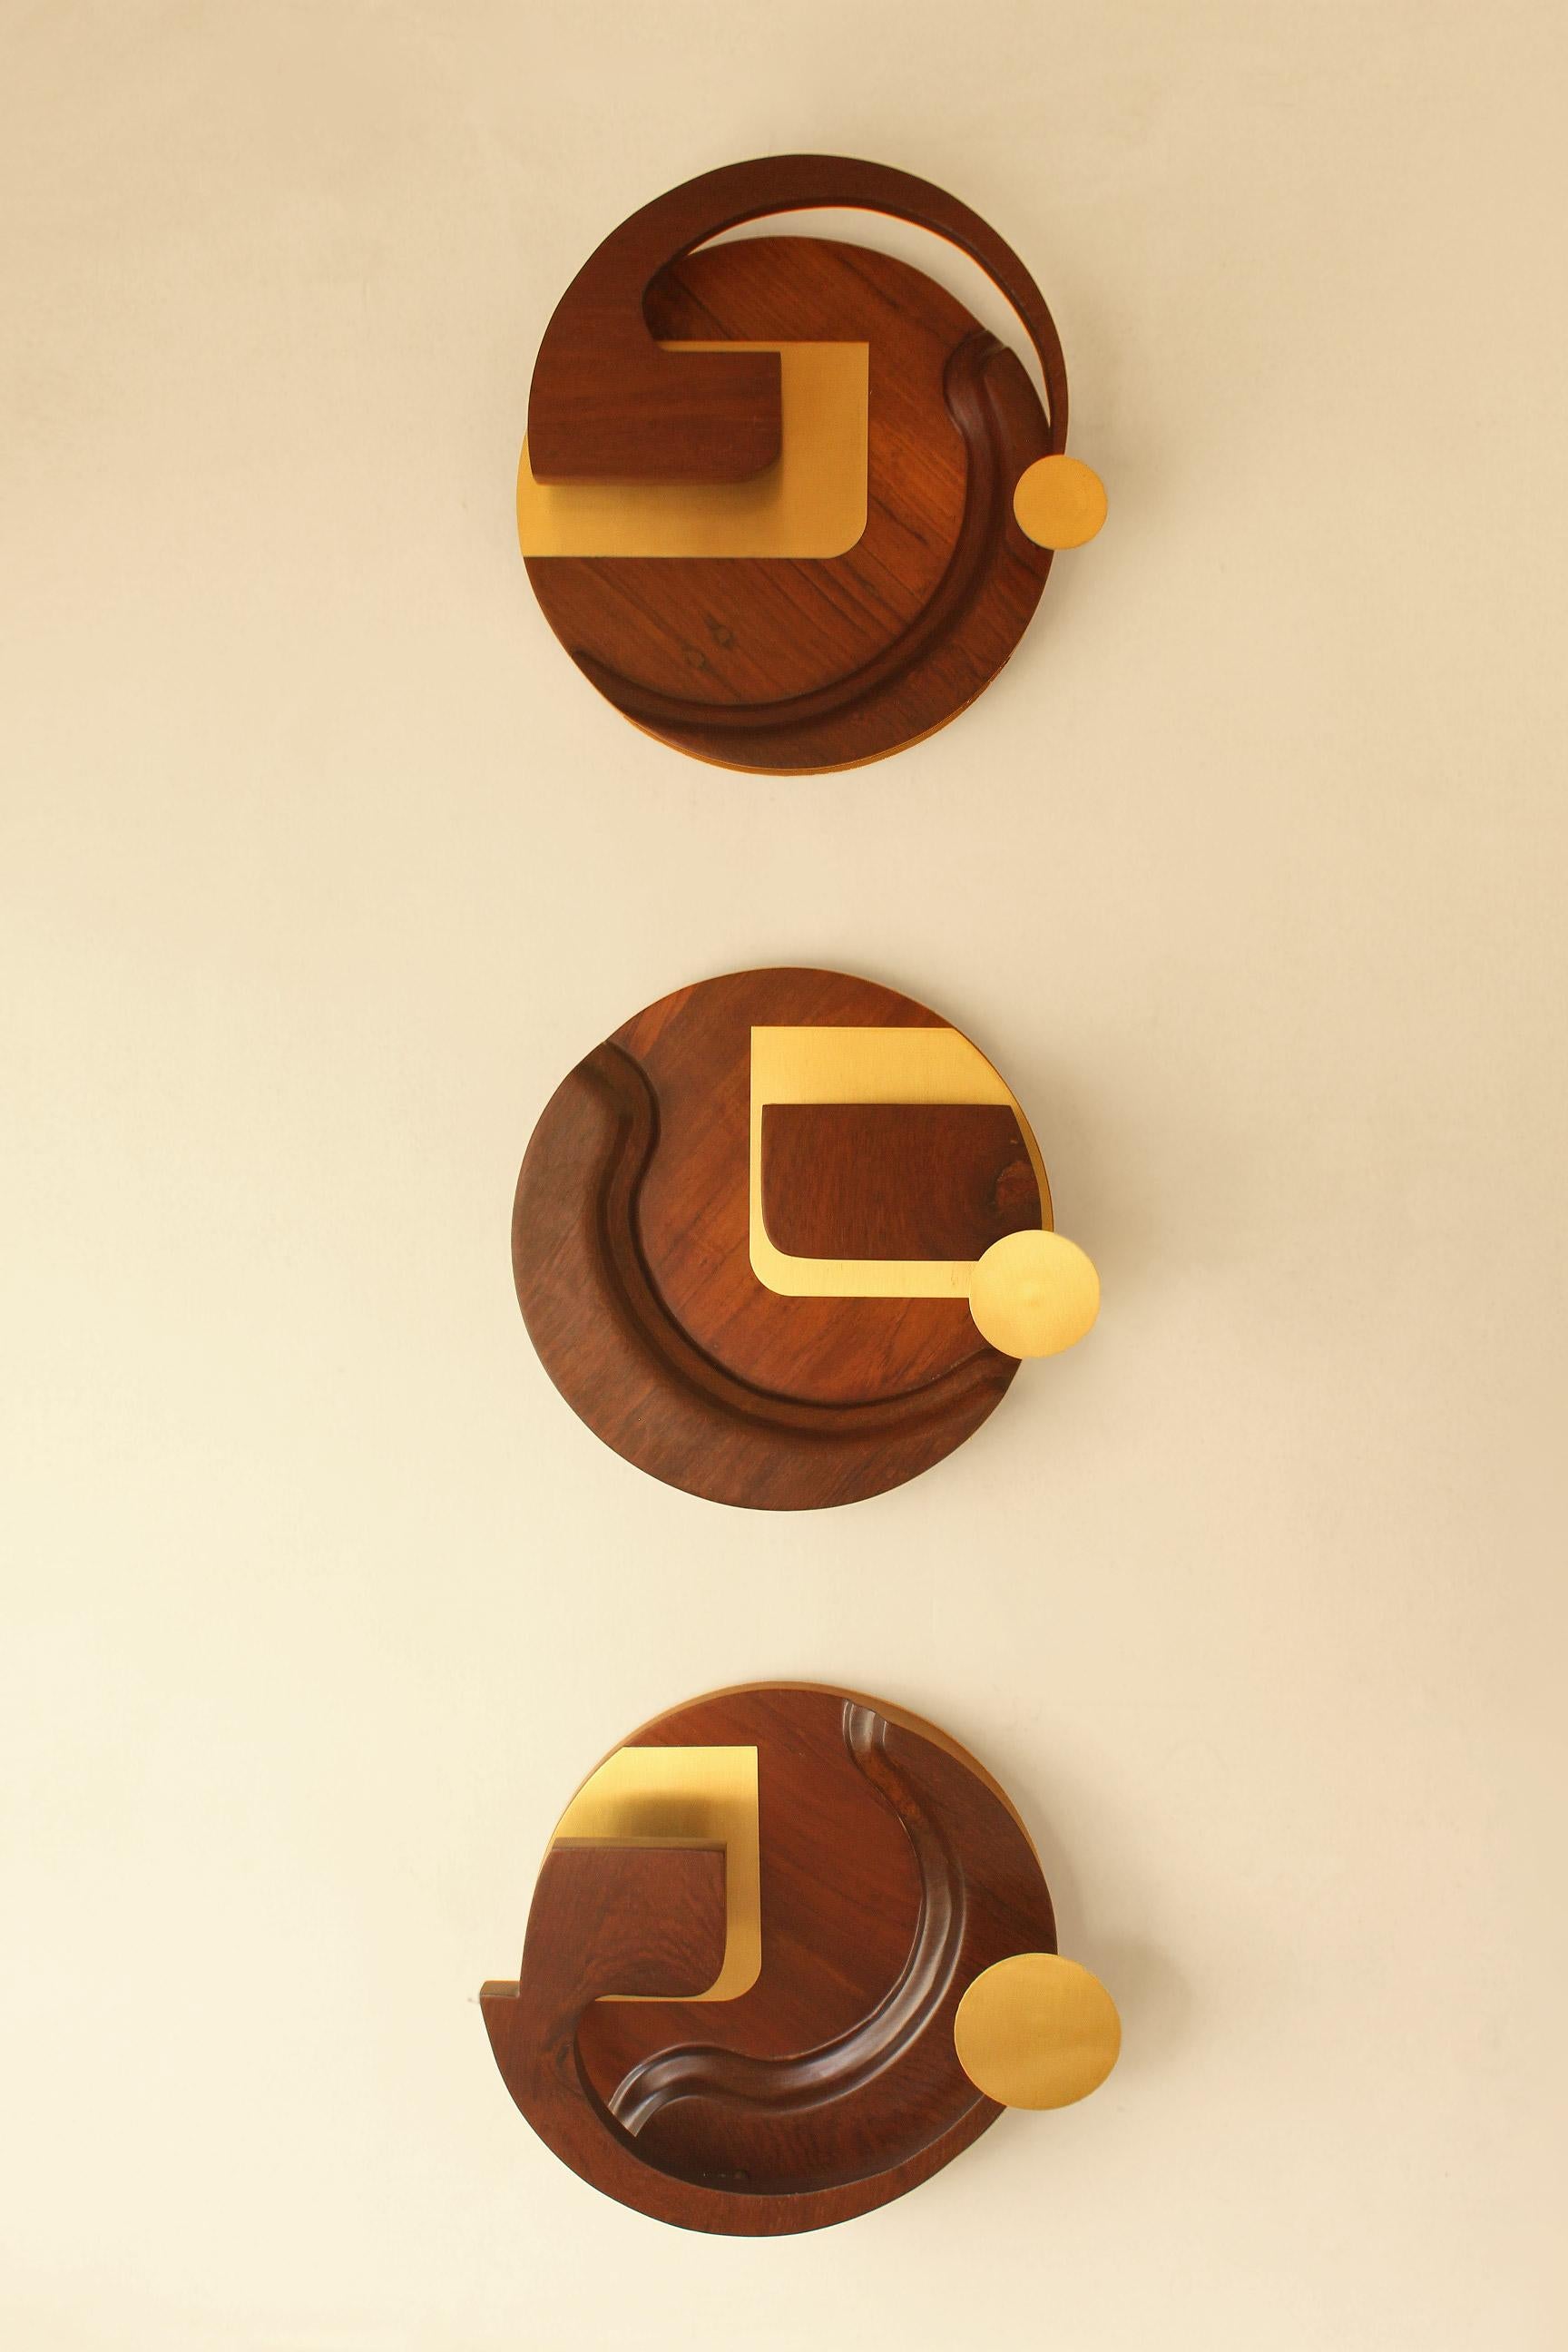 Traya Wall Lamp by Studio Indigene
Dimensions: D 30.48 x W 30.48 x H 7.62 cm
Materials: Teak Wood & Brass. 
Colors Brown, Natural Wooden Finish.

Traya, a 3-piece wall mural with lights, is a fluid abstract composition, played out in 3 circles, and